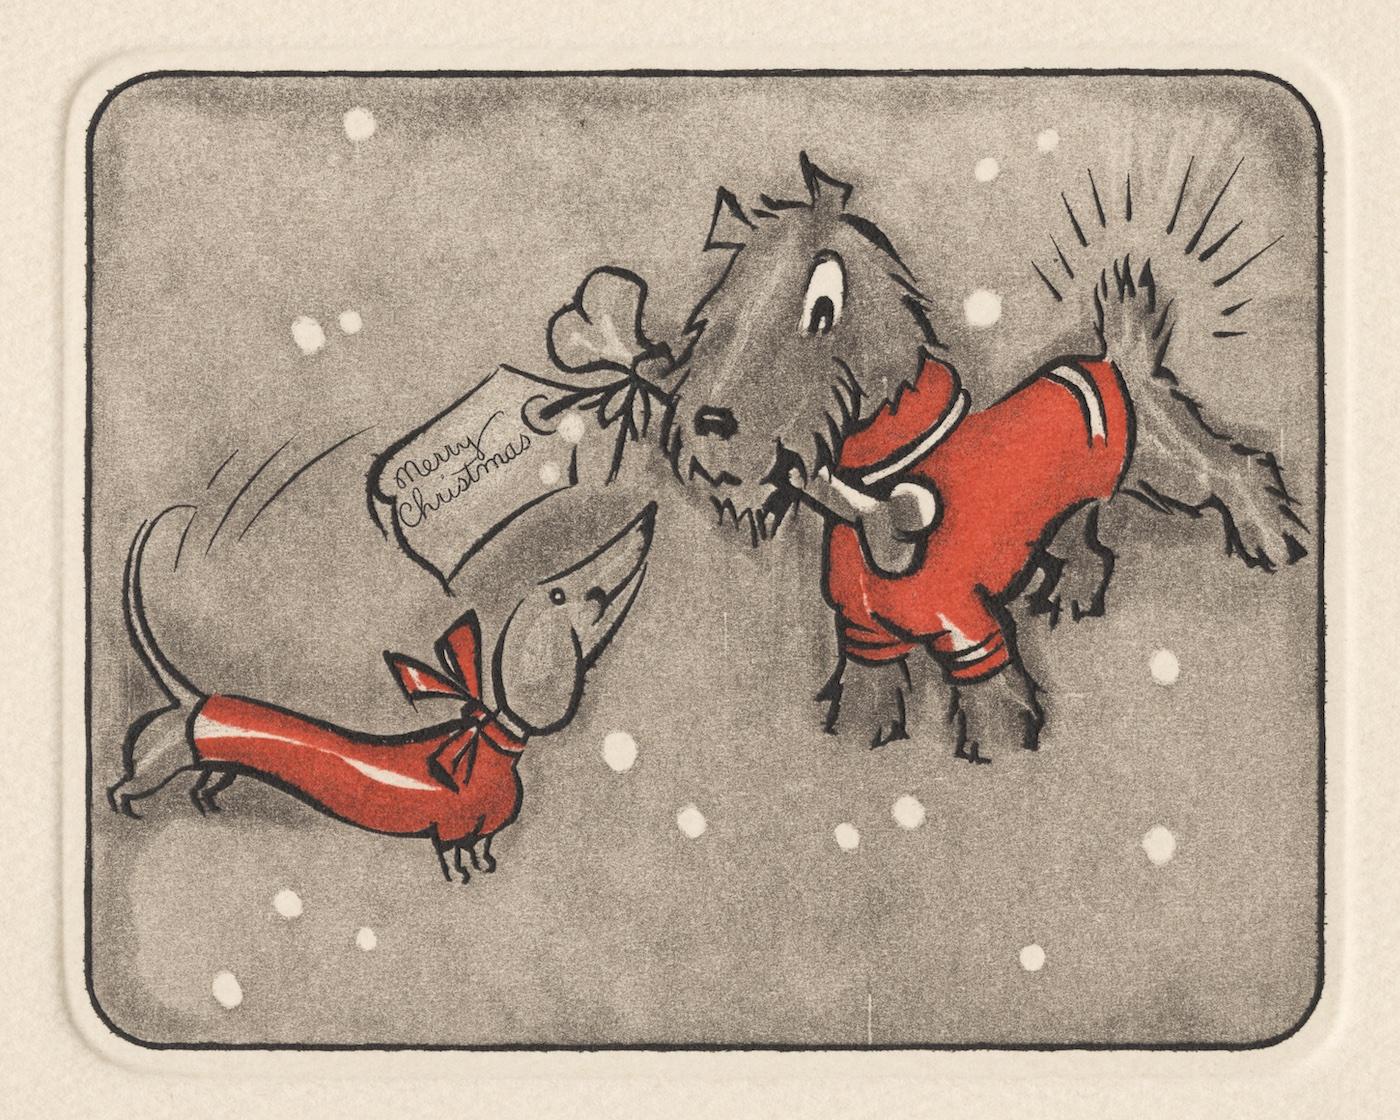 A Christmas card with a dog offering another dog a bone